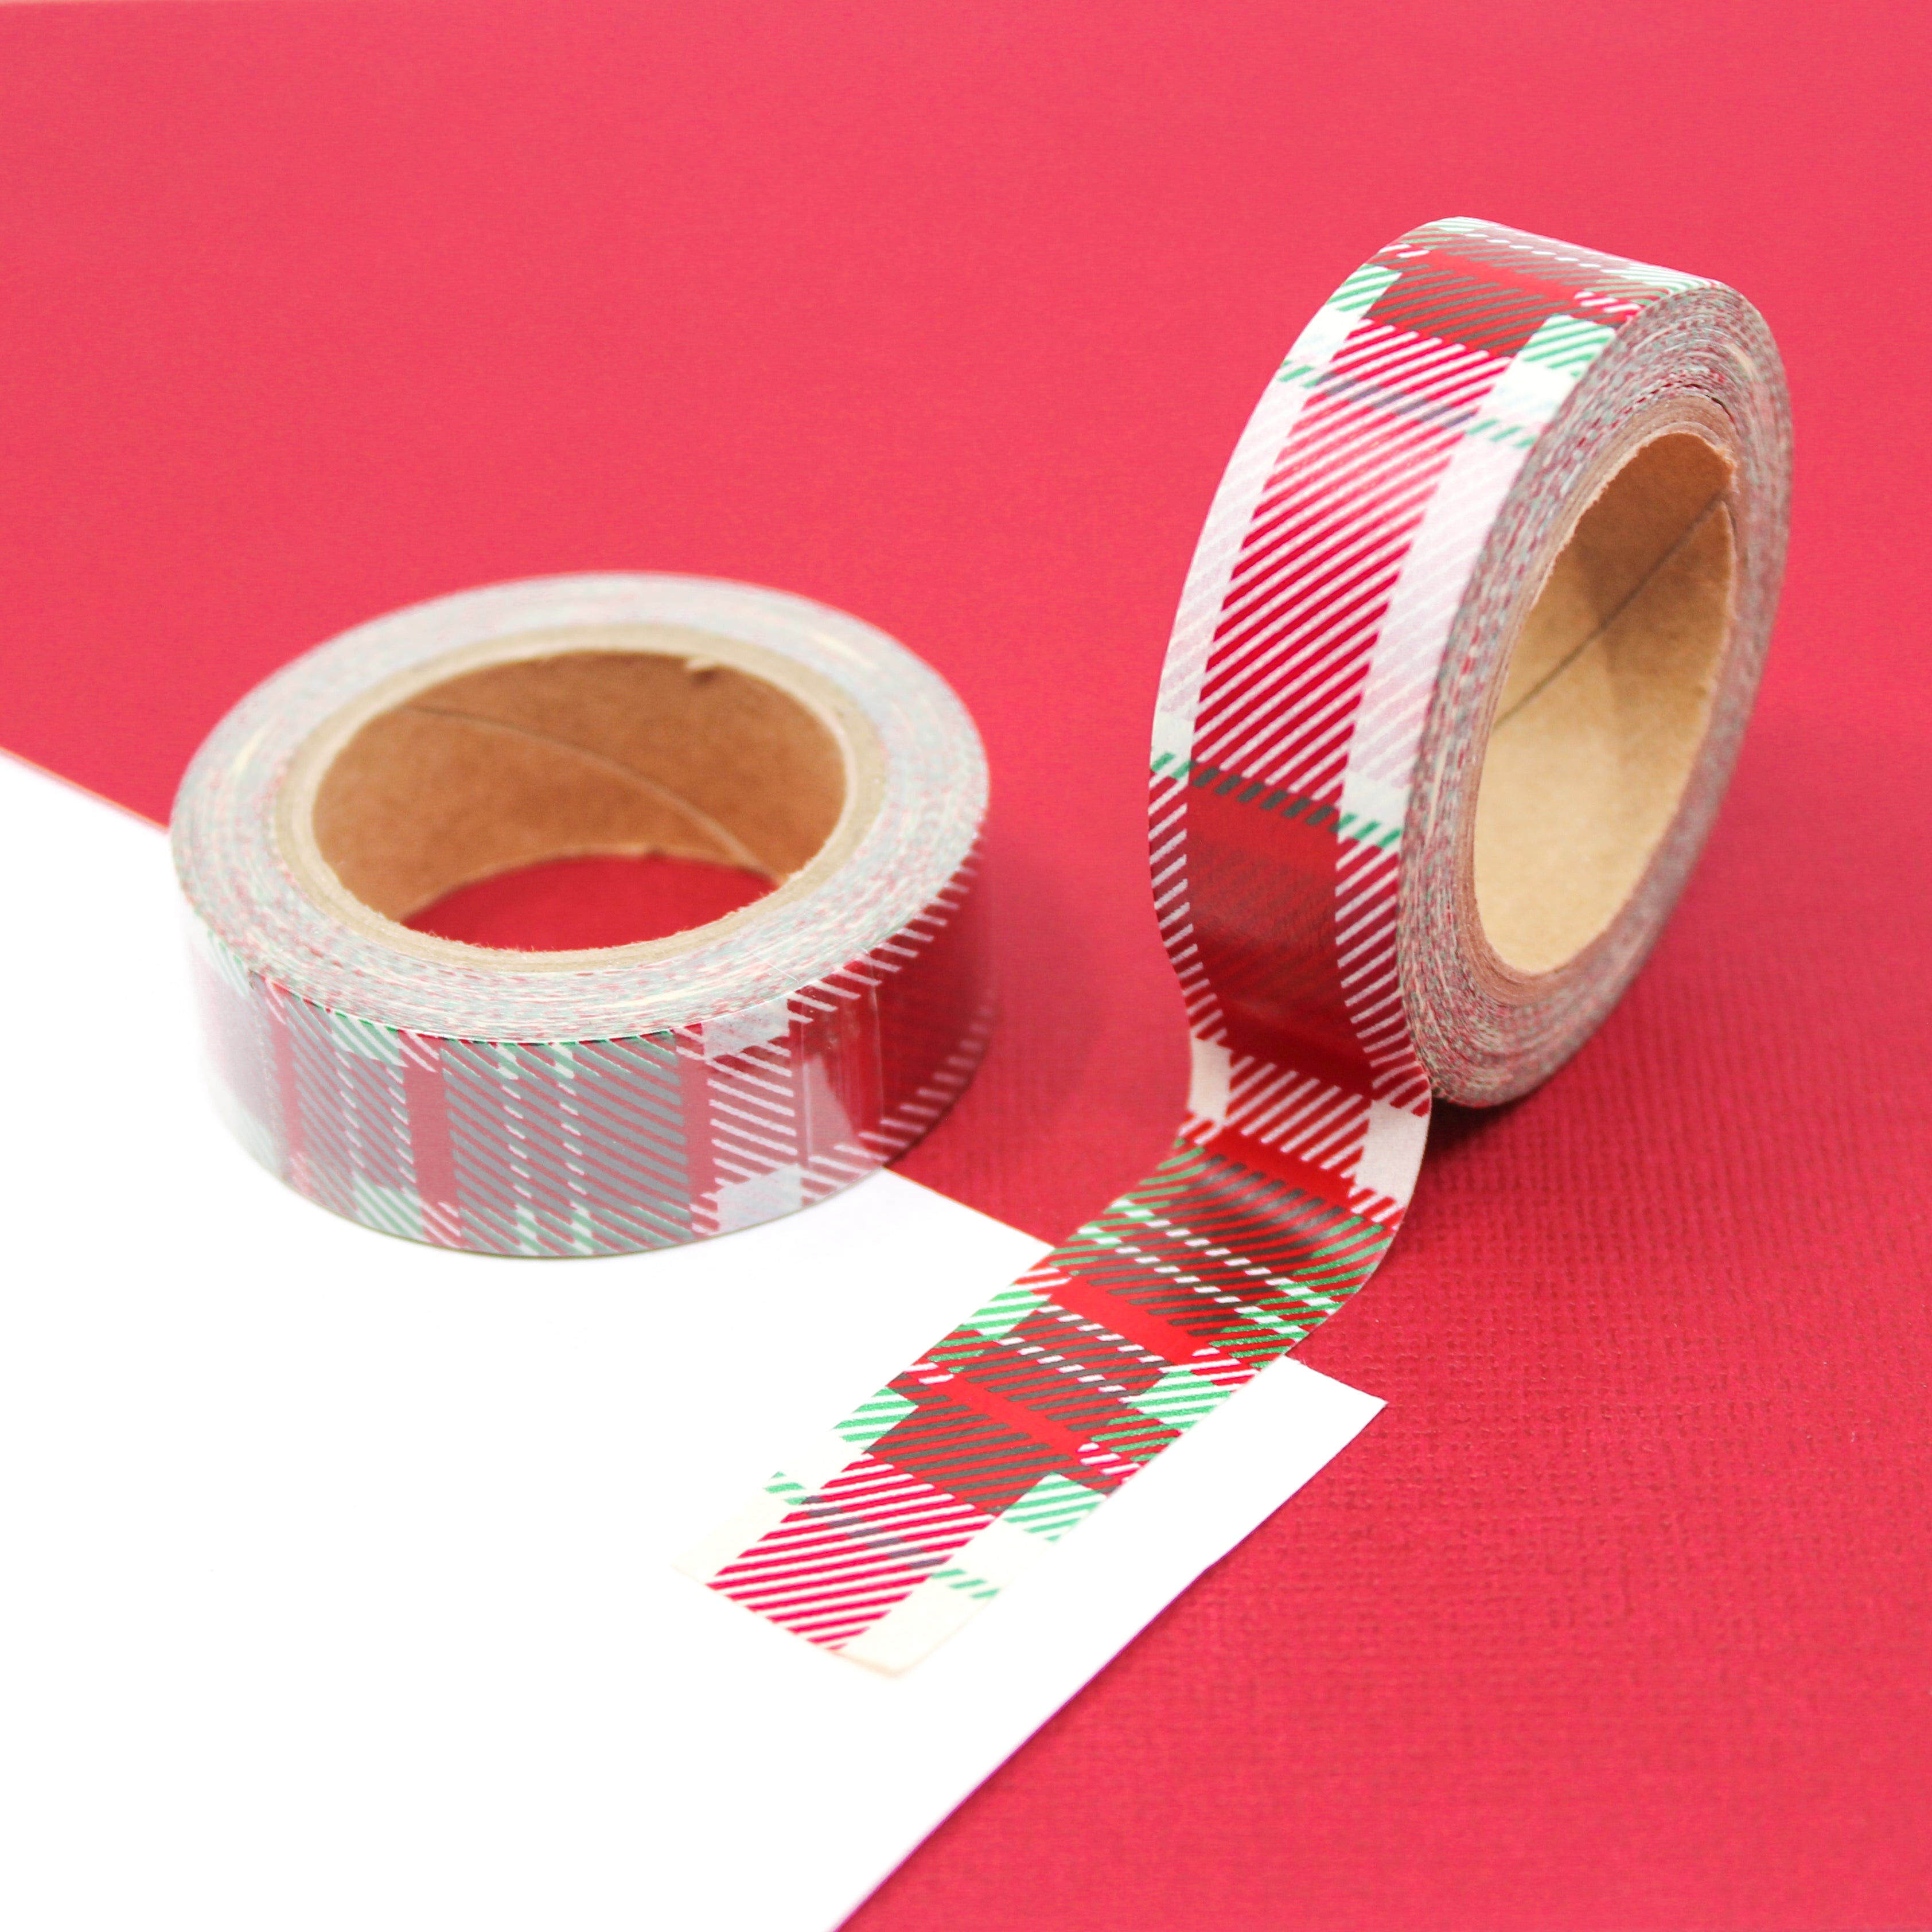 This is a red holiday plaid view themed washi tape from BBB Supplies Craft Shop